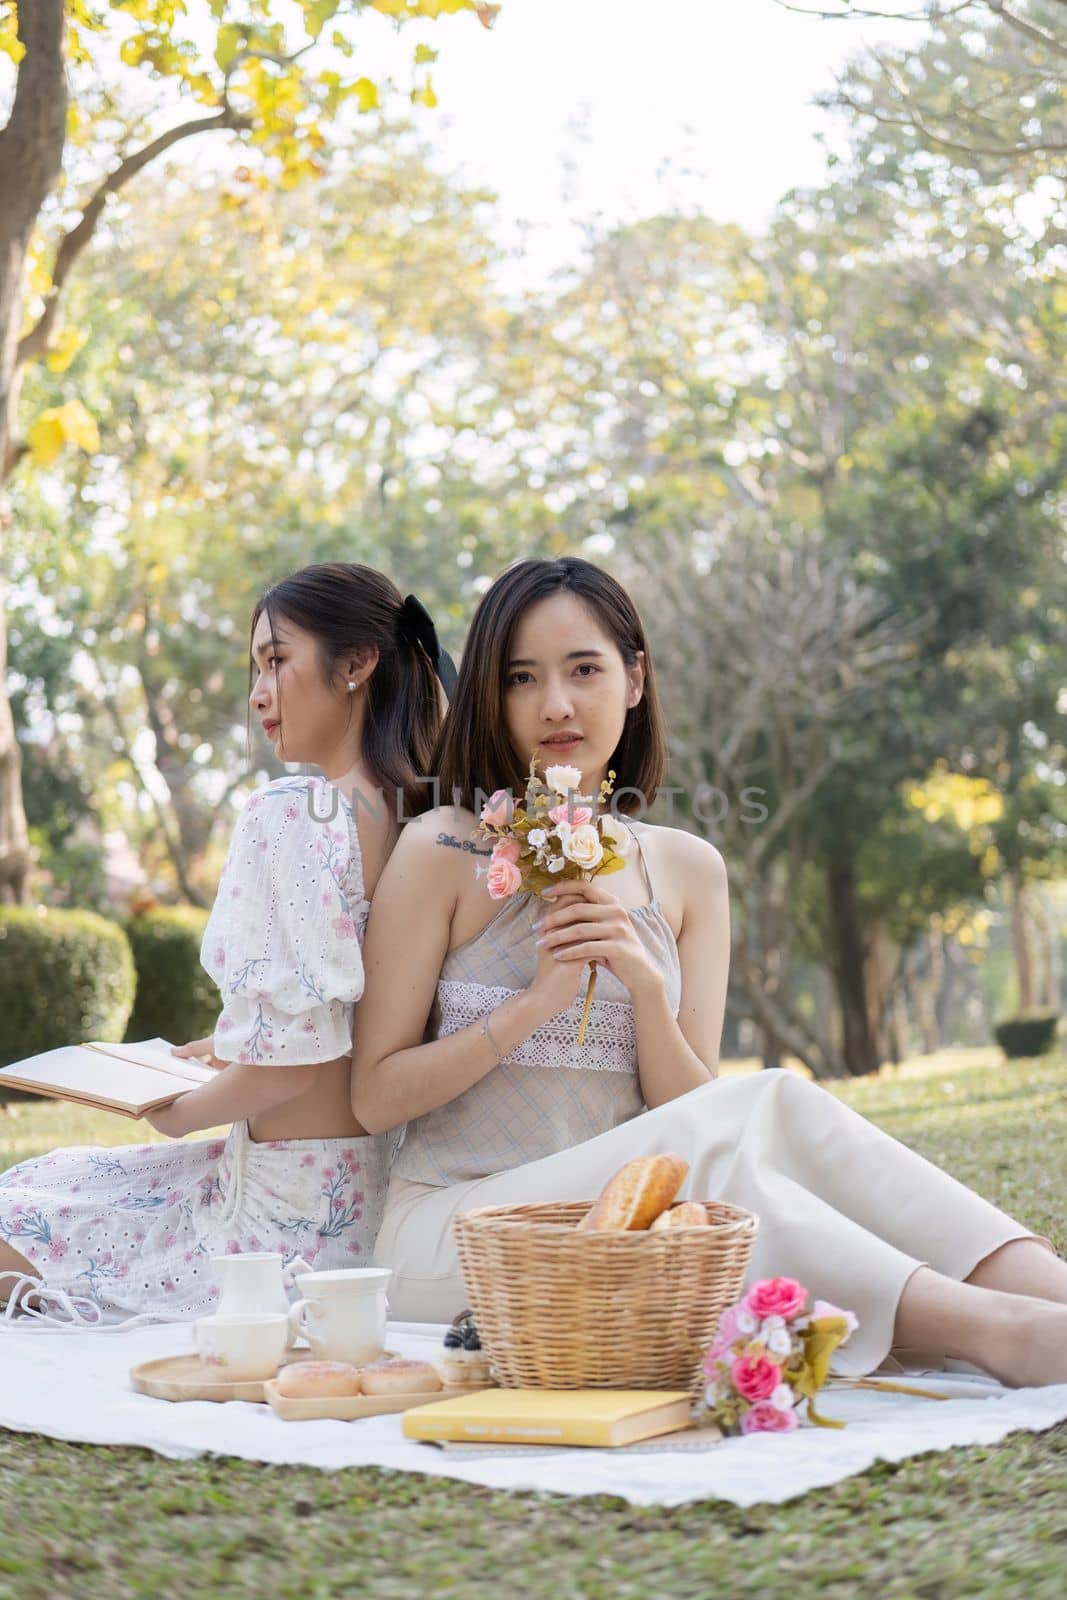 Charming beautiful young Asian woman in a lovely dress, holding a flower bouquet, enjoying a picnic with her friend in the park by nateemee